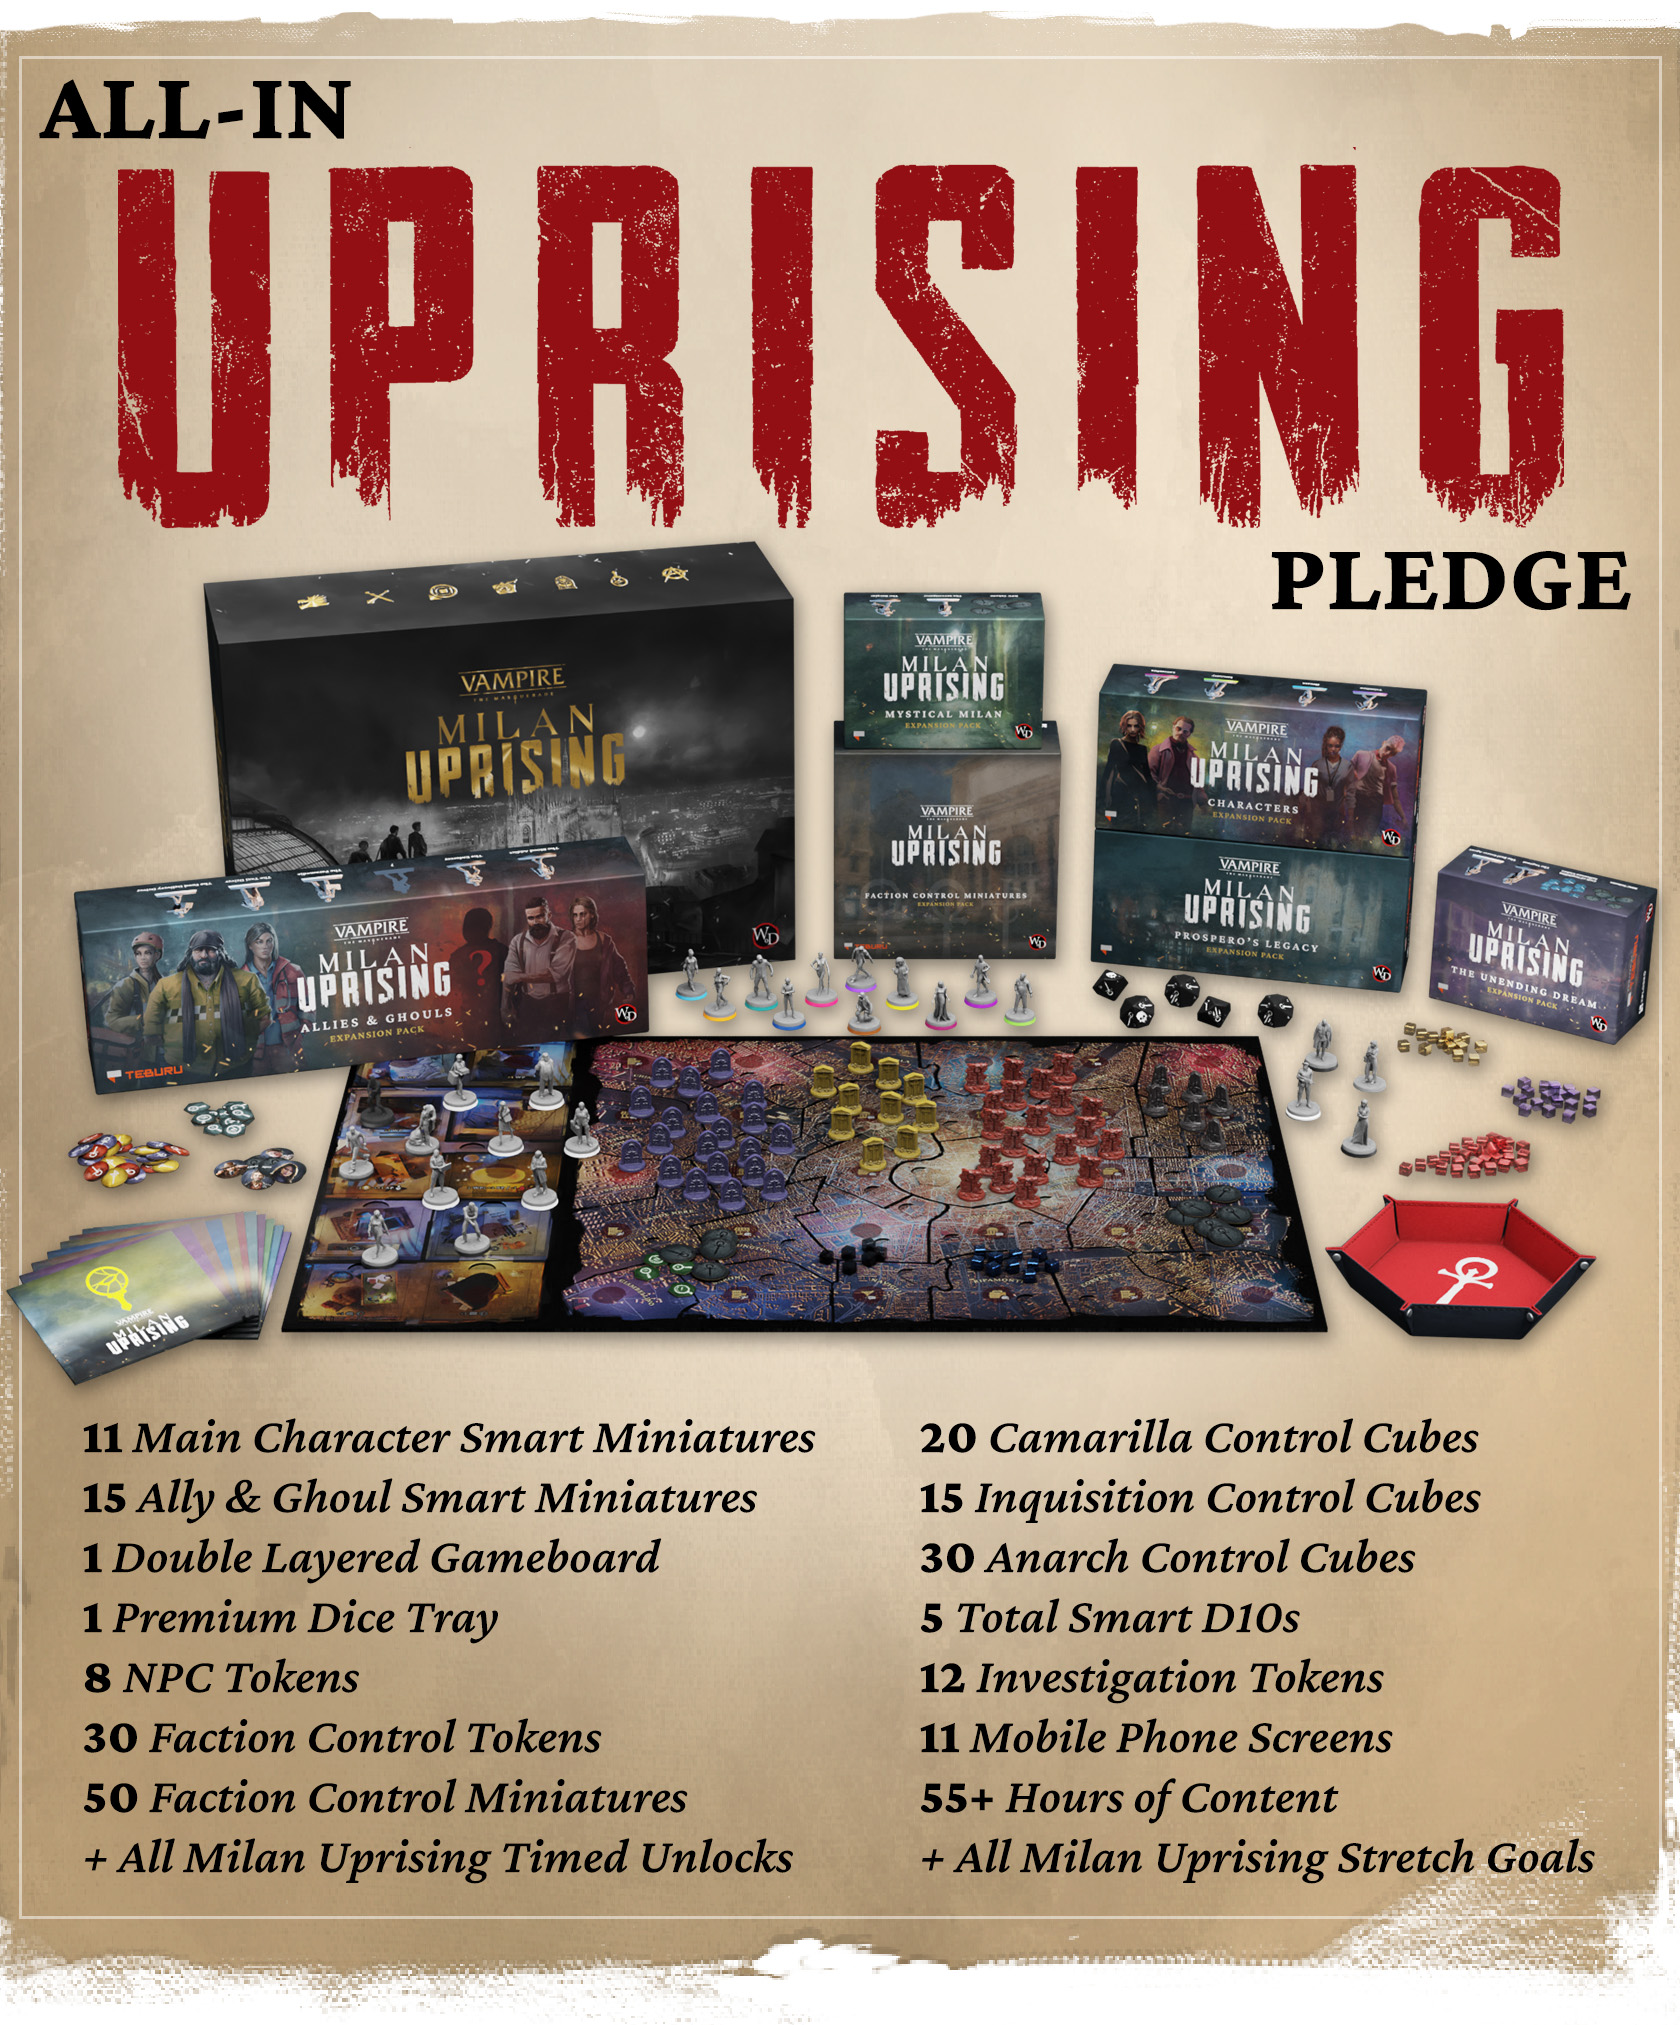 Vampire: The Masquerade - Milan Uprising Fully Funded in 1 Hour